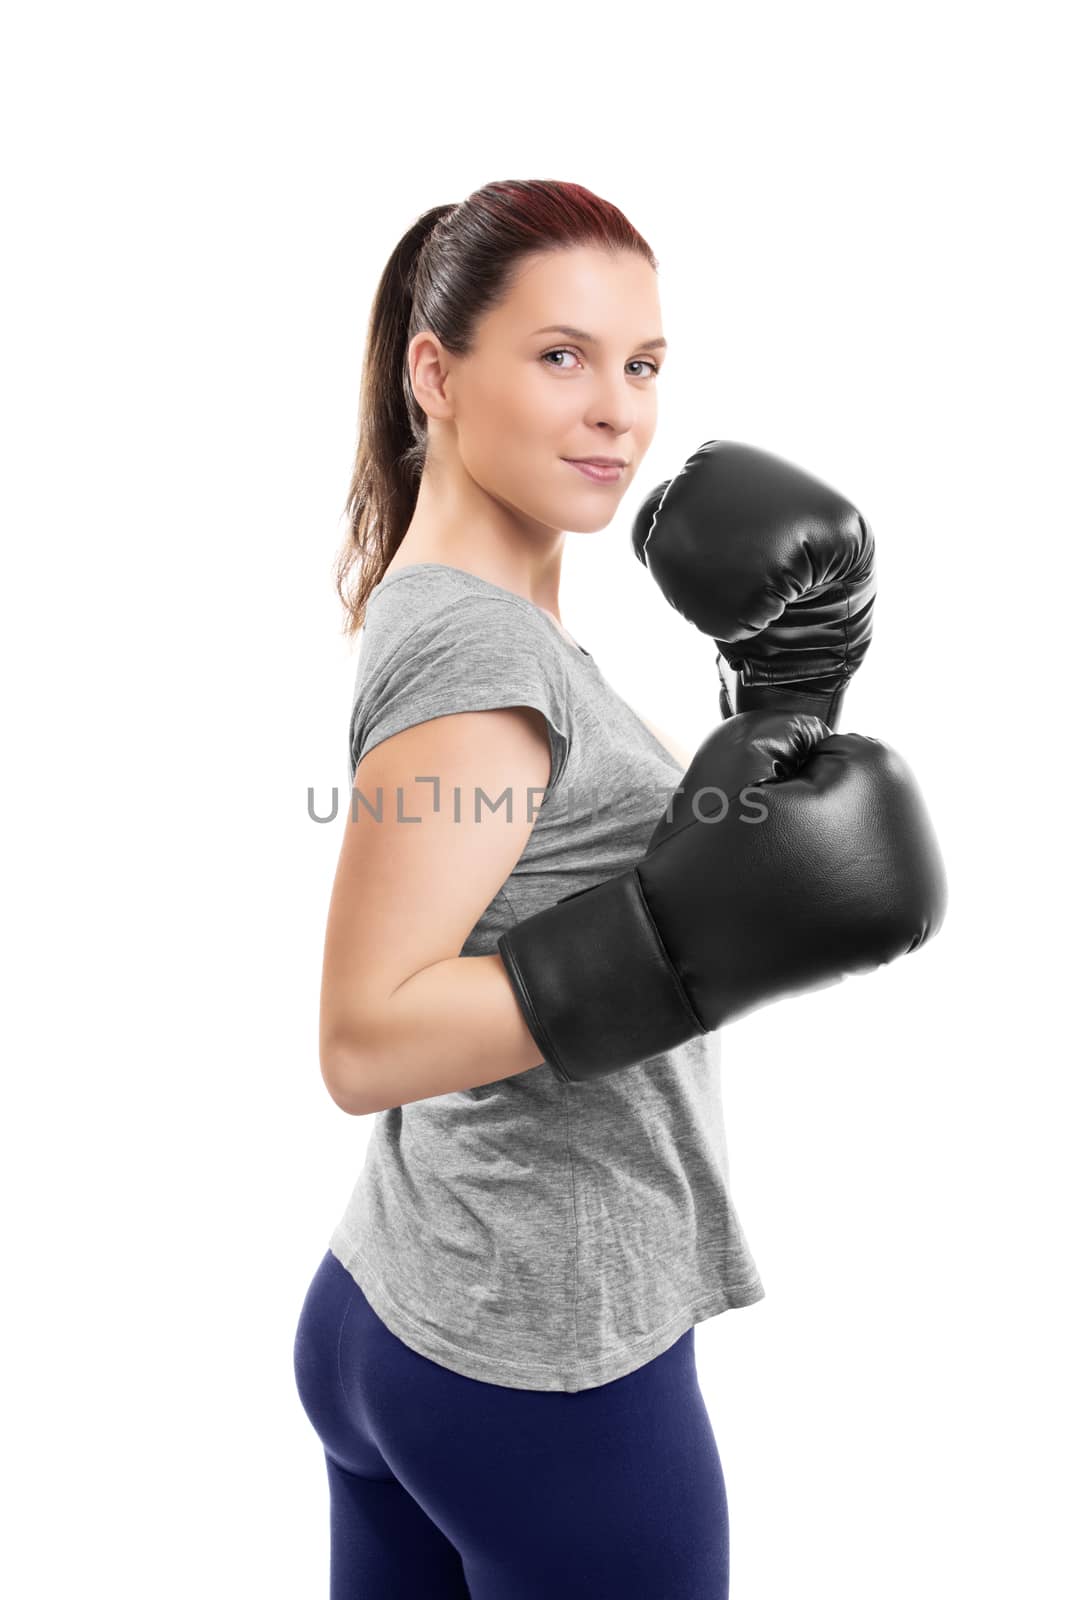 Beautiful young woman with boxing gloves by Mendelex